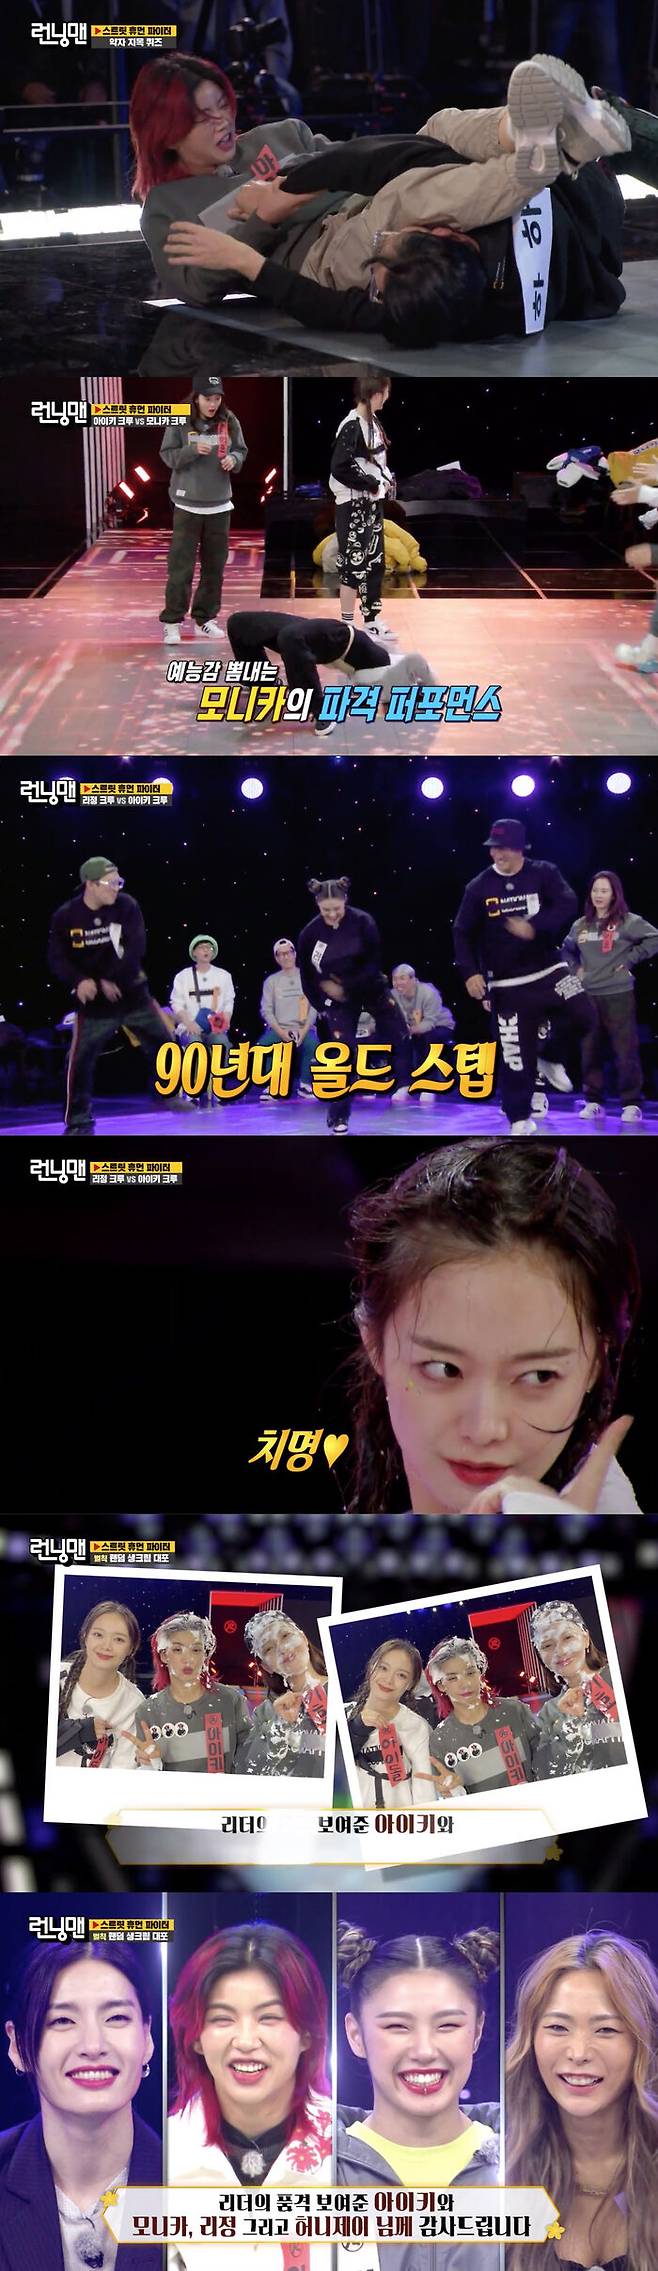 A I-ki struck a penalty.On the 14th SBS Running Man, Street Woman and The Fighter Leaders performed Street Human The Fighter Race.On this day, the members challenged various missions with Sufa Leaders Honey Jessie J, Monica, Aiki and Ri Jung.The mission is divided into four Crewes, and the bottom two teams are going to play dance battle and receive penalty arrangements.Monica teamed up with Yang Se-chan and Ji Suk-jin, and Kim Jong Kook and Haha became a team with Lee Jung.Also, Yoo Jae-Suk and Jeon So-min became Crewe like Honey Jessie J, and Aiki teamed up with Song Ji-hyo.However, on the day of the Honey Jessie Js condition, Yoo Jae-Suk, who was Honey Jessie J Crewe, joined Monica Crewe and Jeon So-min joined Aiki Crewe.As the mission progressed, the charm of the leaders exploded. In particular, Aiki laughed as he showed his appearance as a gangster as the members.He also overcome Haha in a struggle with a desire to win no one, and he was impressed.The first dance Battle was the match between Aiki Crewe and Monica Crewe, when Monica showed off her unconventional performance to the ship and led Crewe to victory.The second dance Battle was played by Ri Jeong Crewe against Aiki Crewe, who performed a woven stage with a composition of members who were well-informed in the dance.In Aiki Crewe, which felt a sense of crisis, the excitement of Jeon So-min exploded; Jeon So-min, who turned himself over bottled water and showed off his deadly charm.After all the missions, the final win was won by Monica Crewe, who received only one penalty deployment, which envied everyone by taking the latest action cam as an injury.And the penalty was given by Aiki Crewe, who told the leader Aiki one of the two cannons to launch fresh cream.Aiki, who knows the cannon to be fired, can avoid penalties enough.However, Aiki said, I will show you the true leader. Spider Lilies was impressed by the fresh cream cannon.